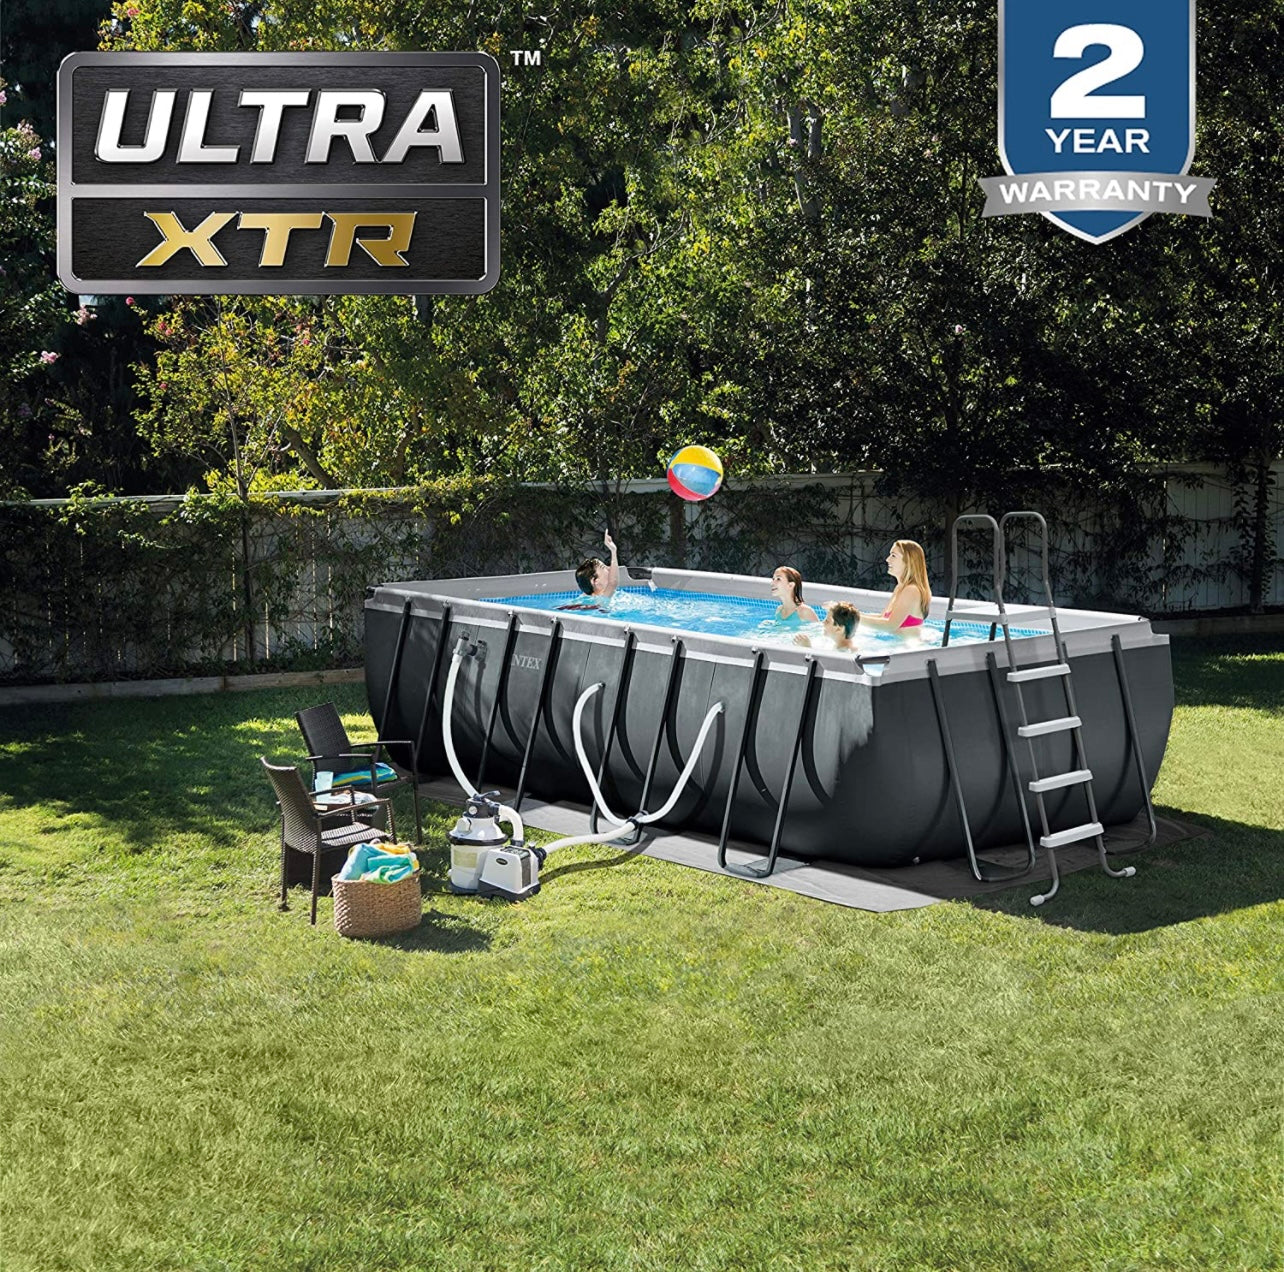 INTEX 26355EH 18ft x 9ft x 52in Ultra XTR Pool Set with Sand Filter Pump - $510